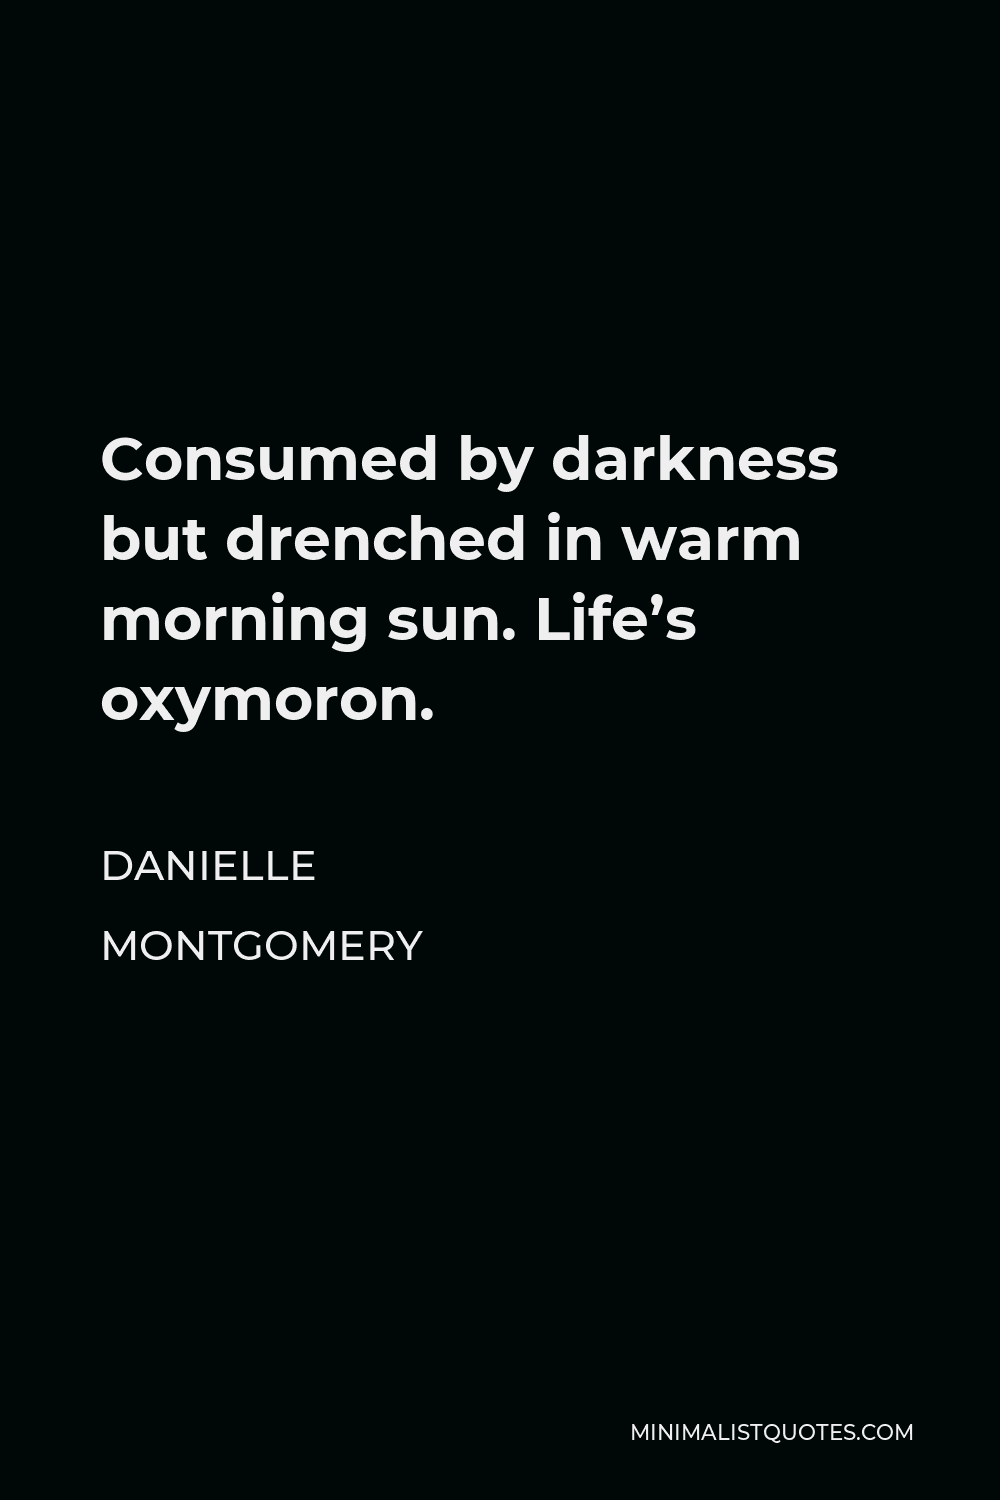 Danielle Montgomery Quote - Consumed by darkness but drenched in warm morning sun. Life’s oxymoron.